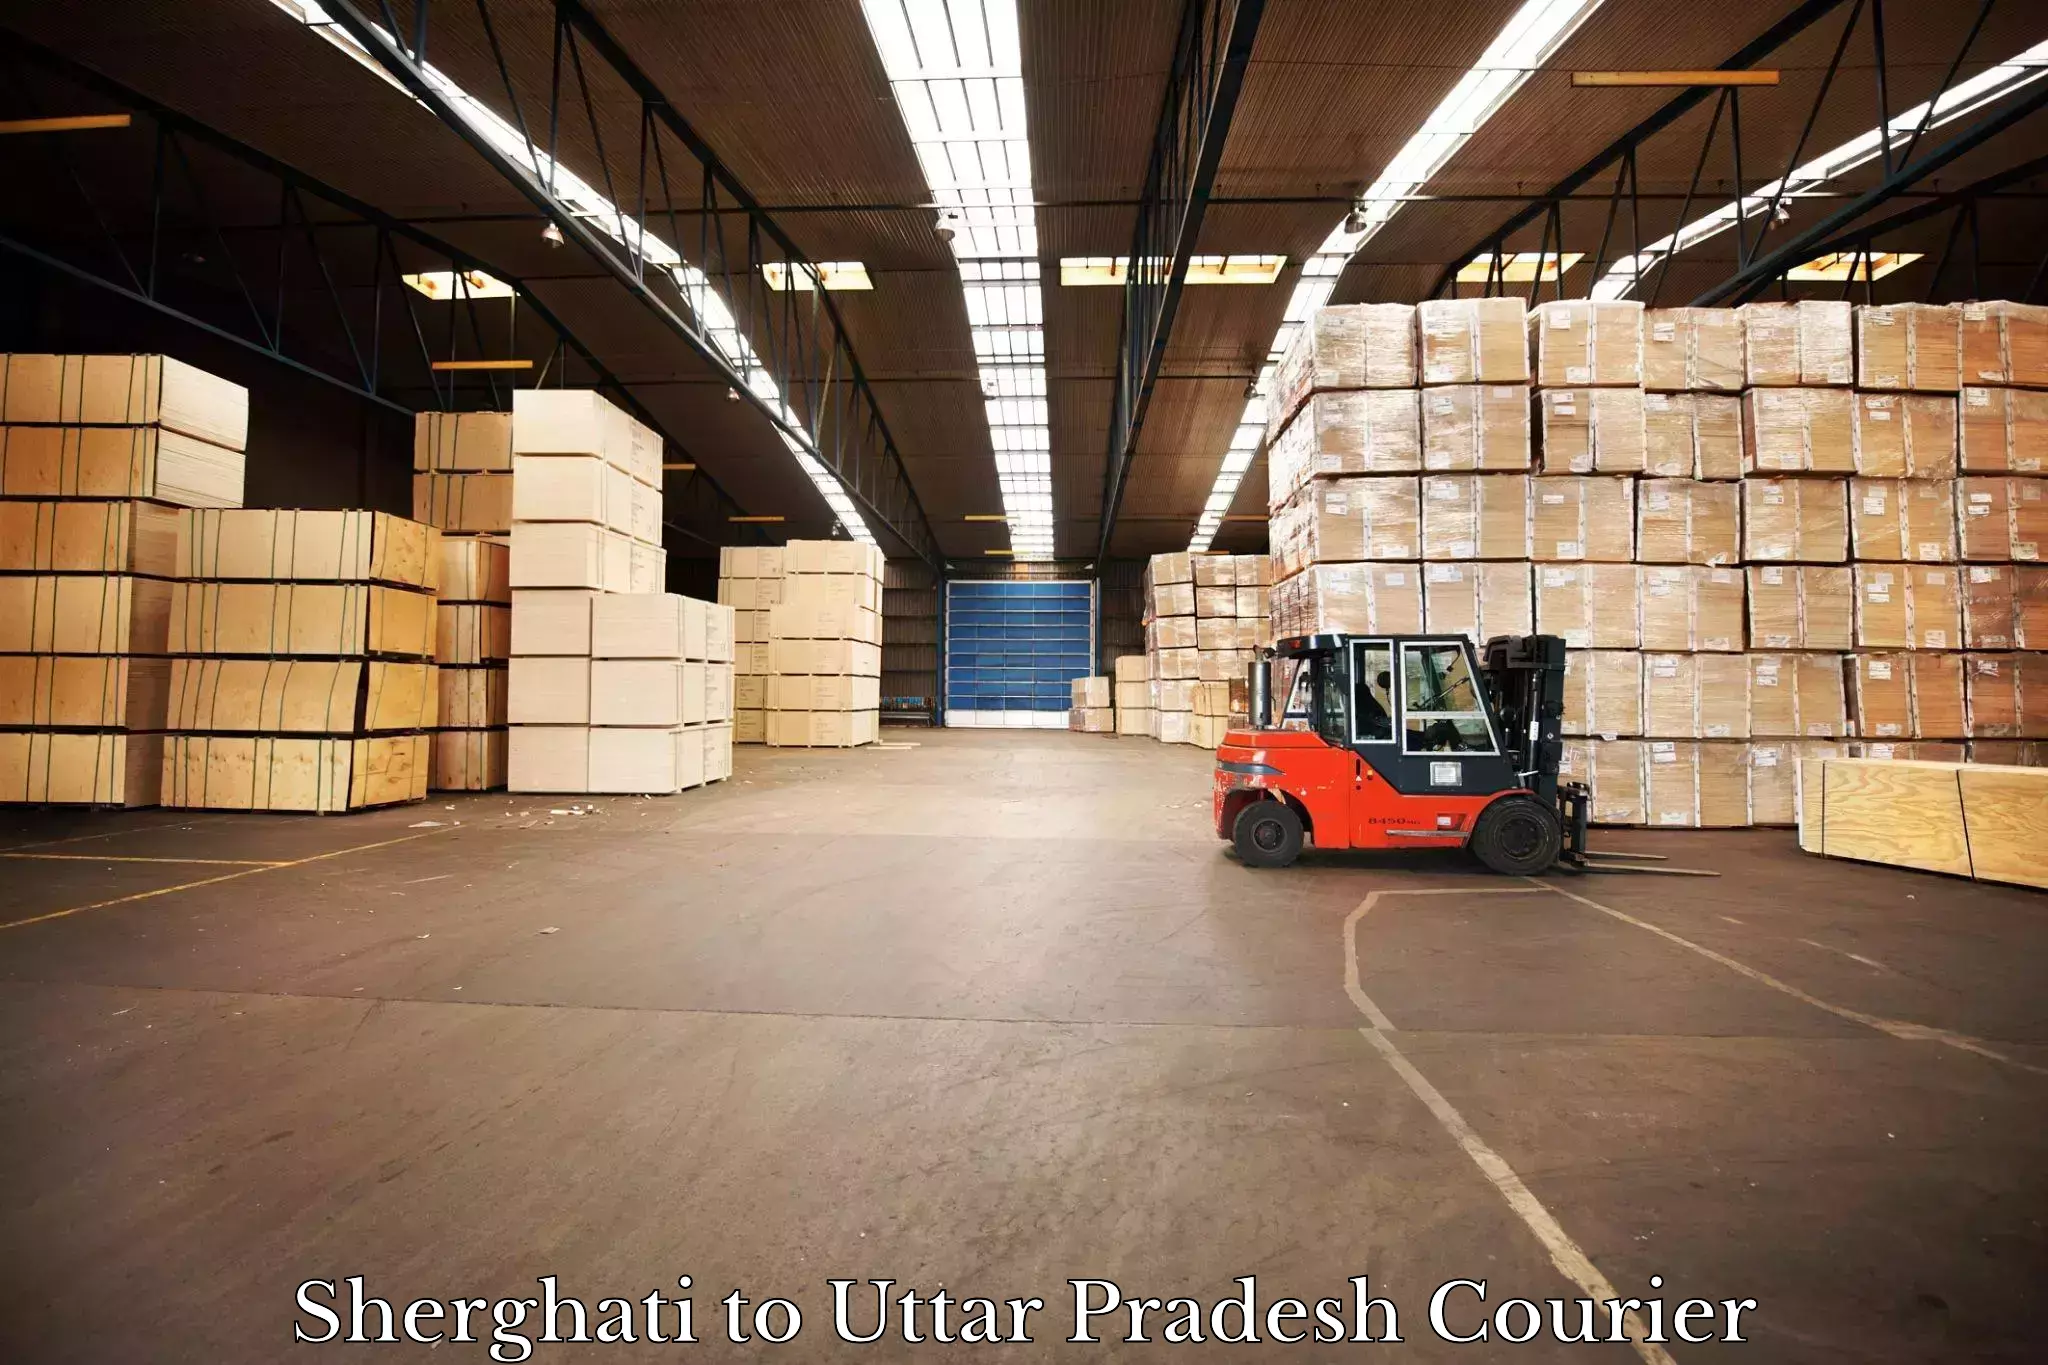 Seamless shipping experience Sherghati to Fatehabad Agra